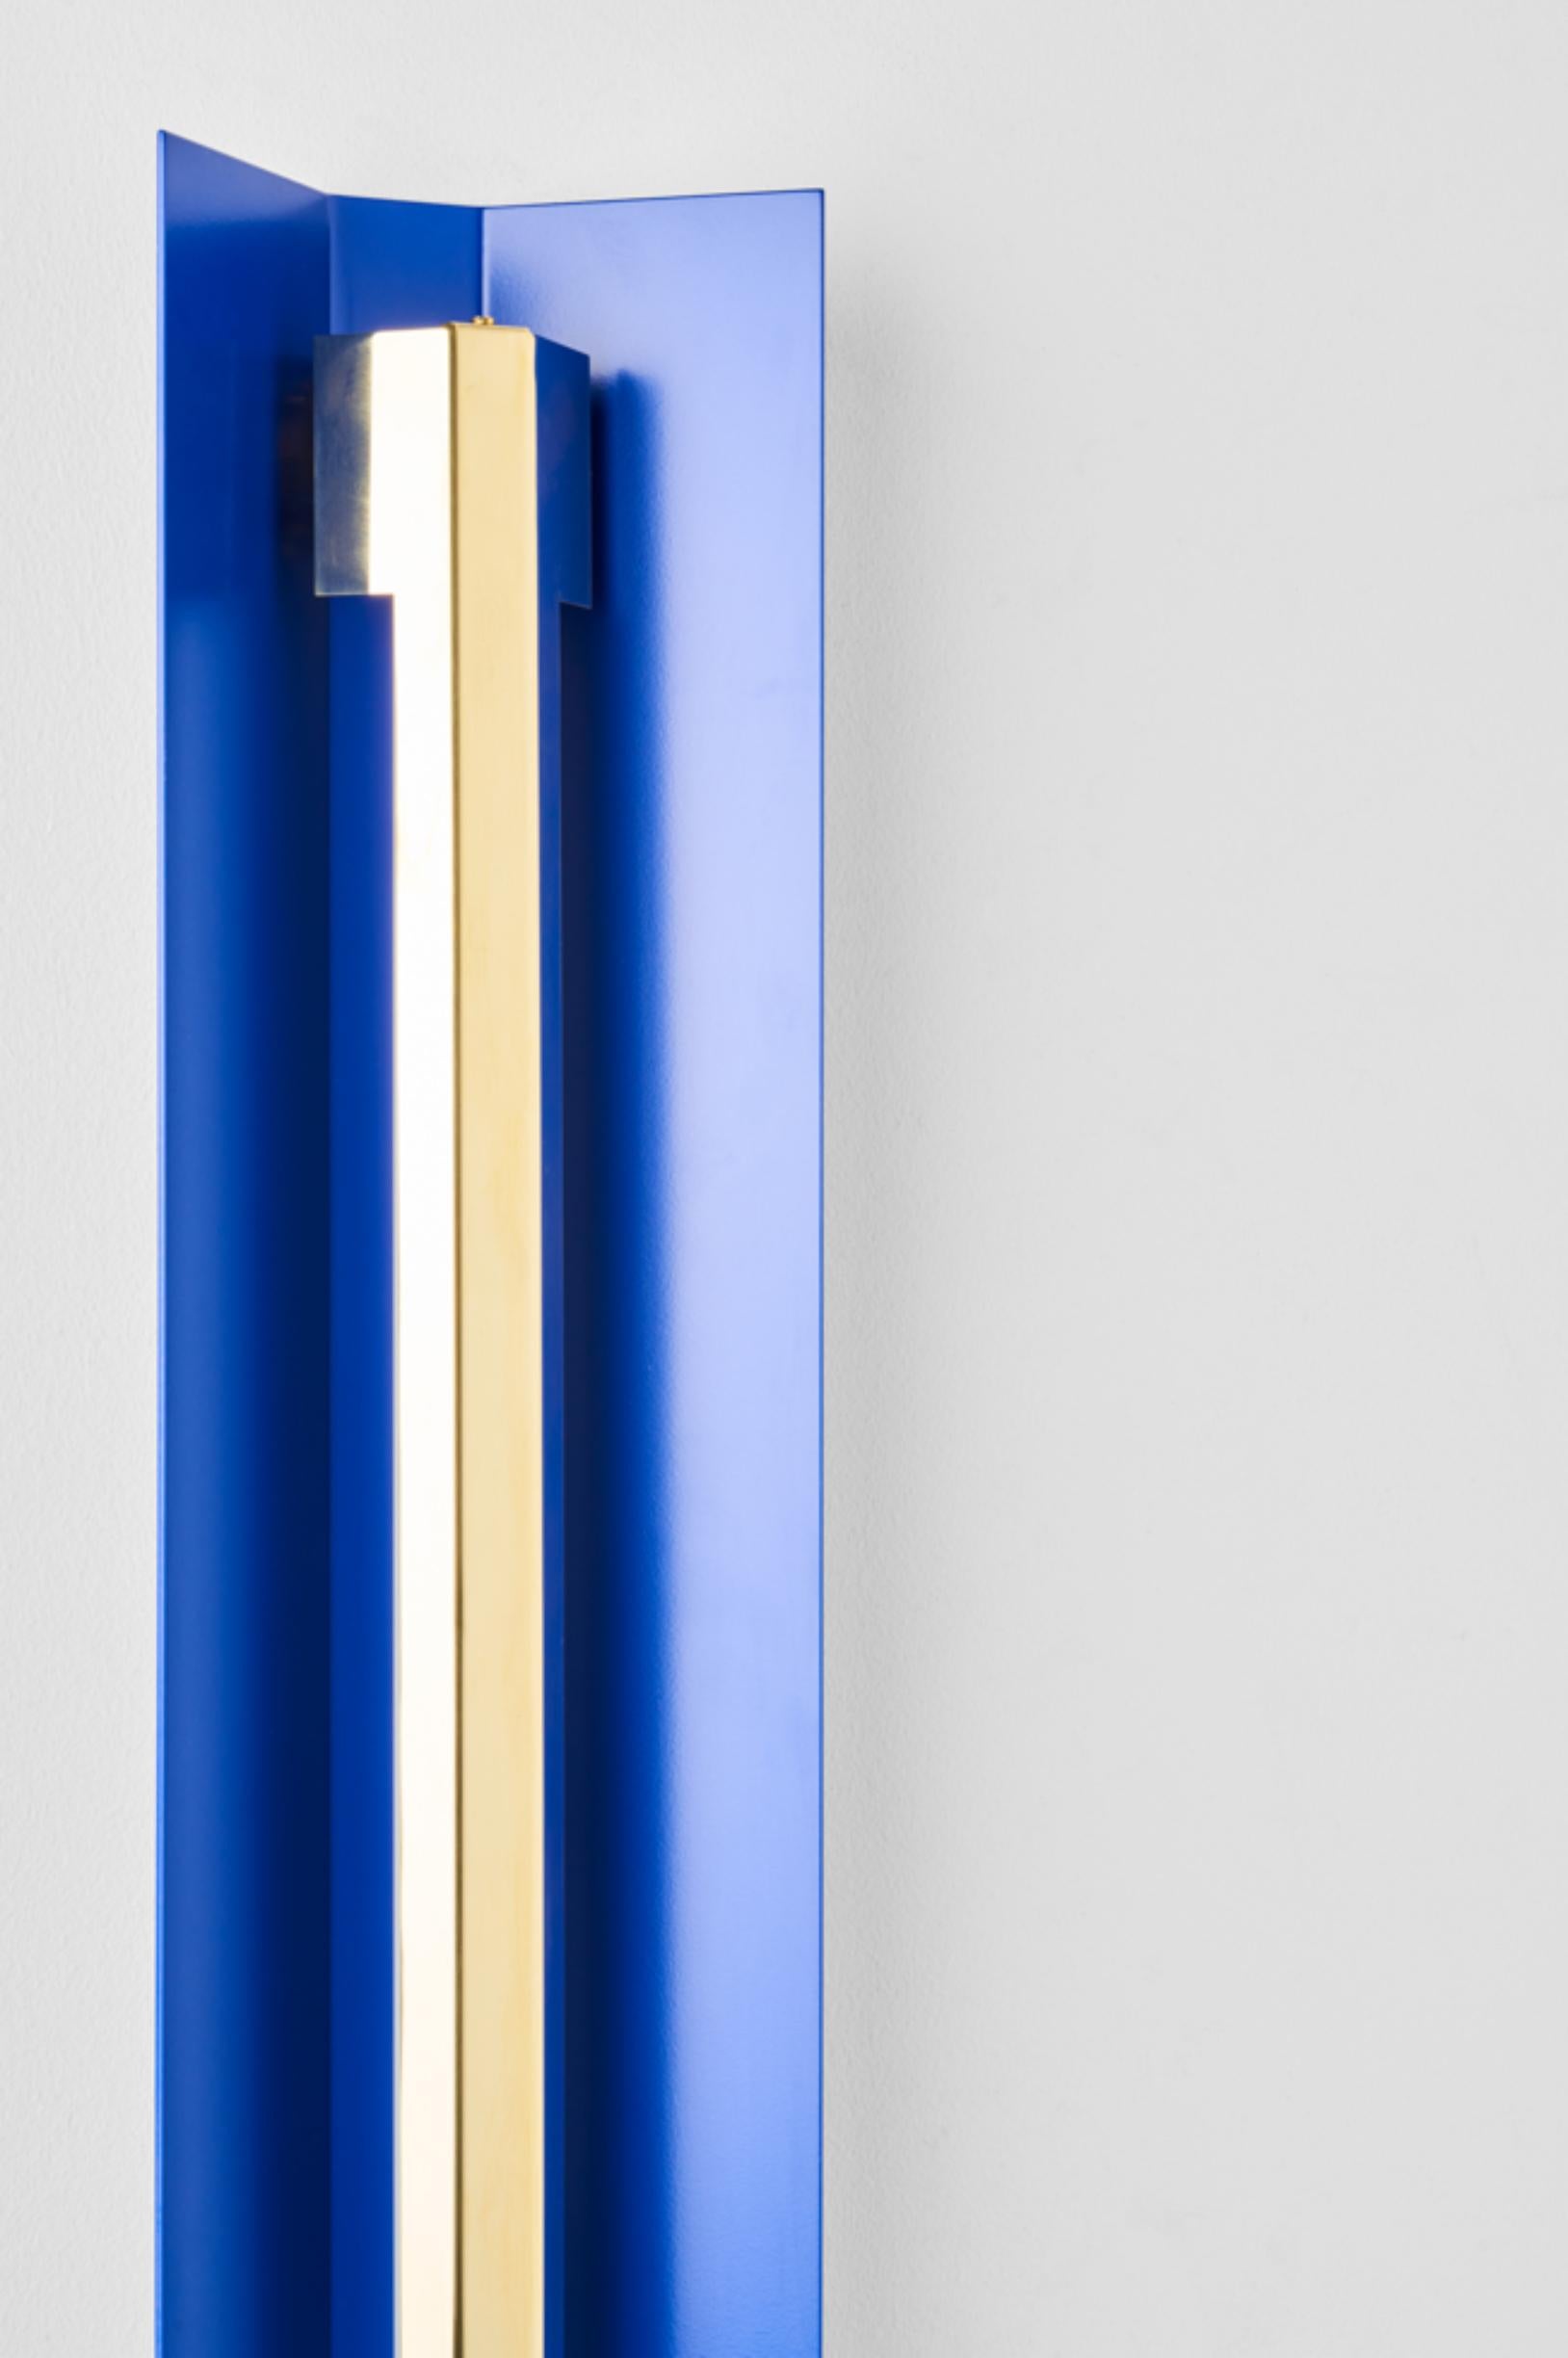 Extra large misalliance ex ultramarine wall light by Lexavala.
Dimensions: D 16 x W 160 x H 8 cm
Materials: Powder coated shade with details made of brass or stainless steel.

There are two lenghts of socket covers, extending over the LED. Two